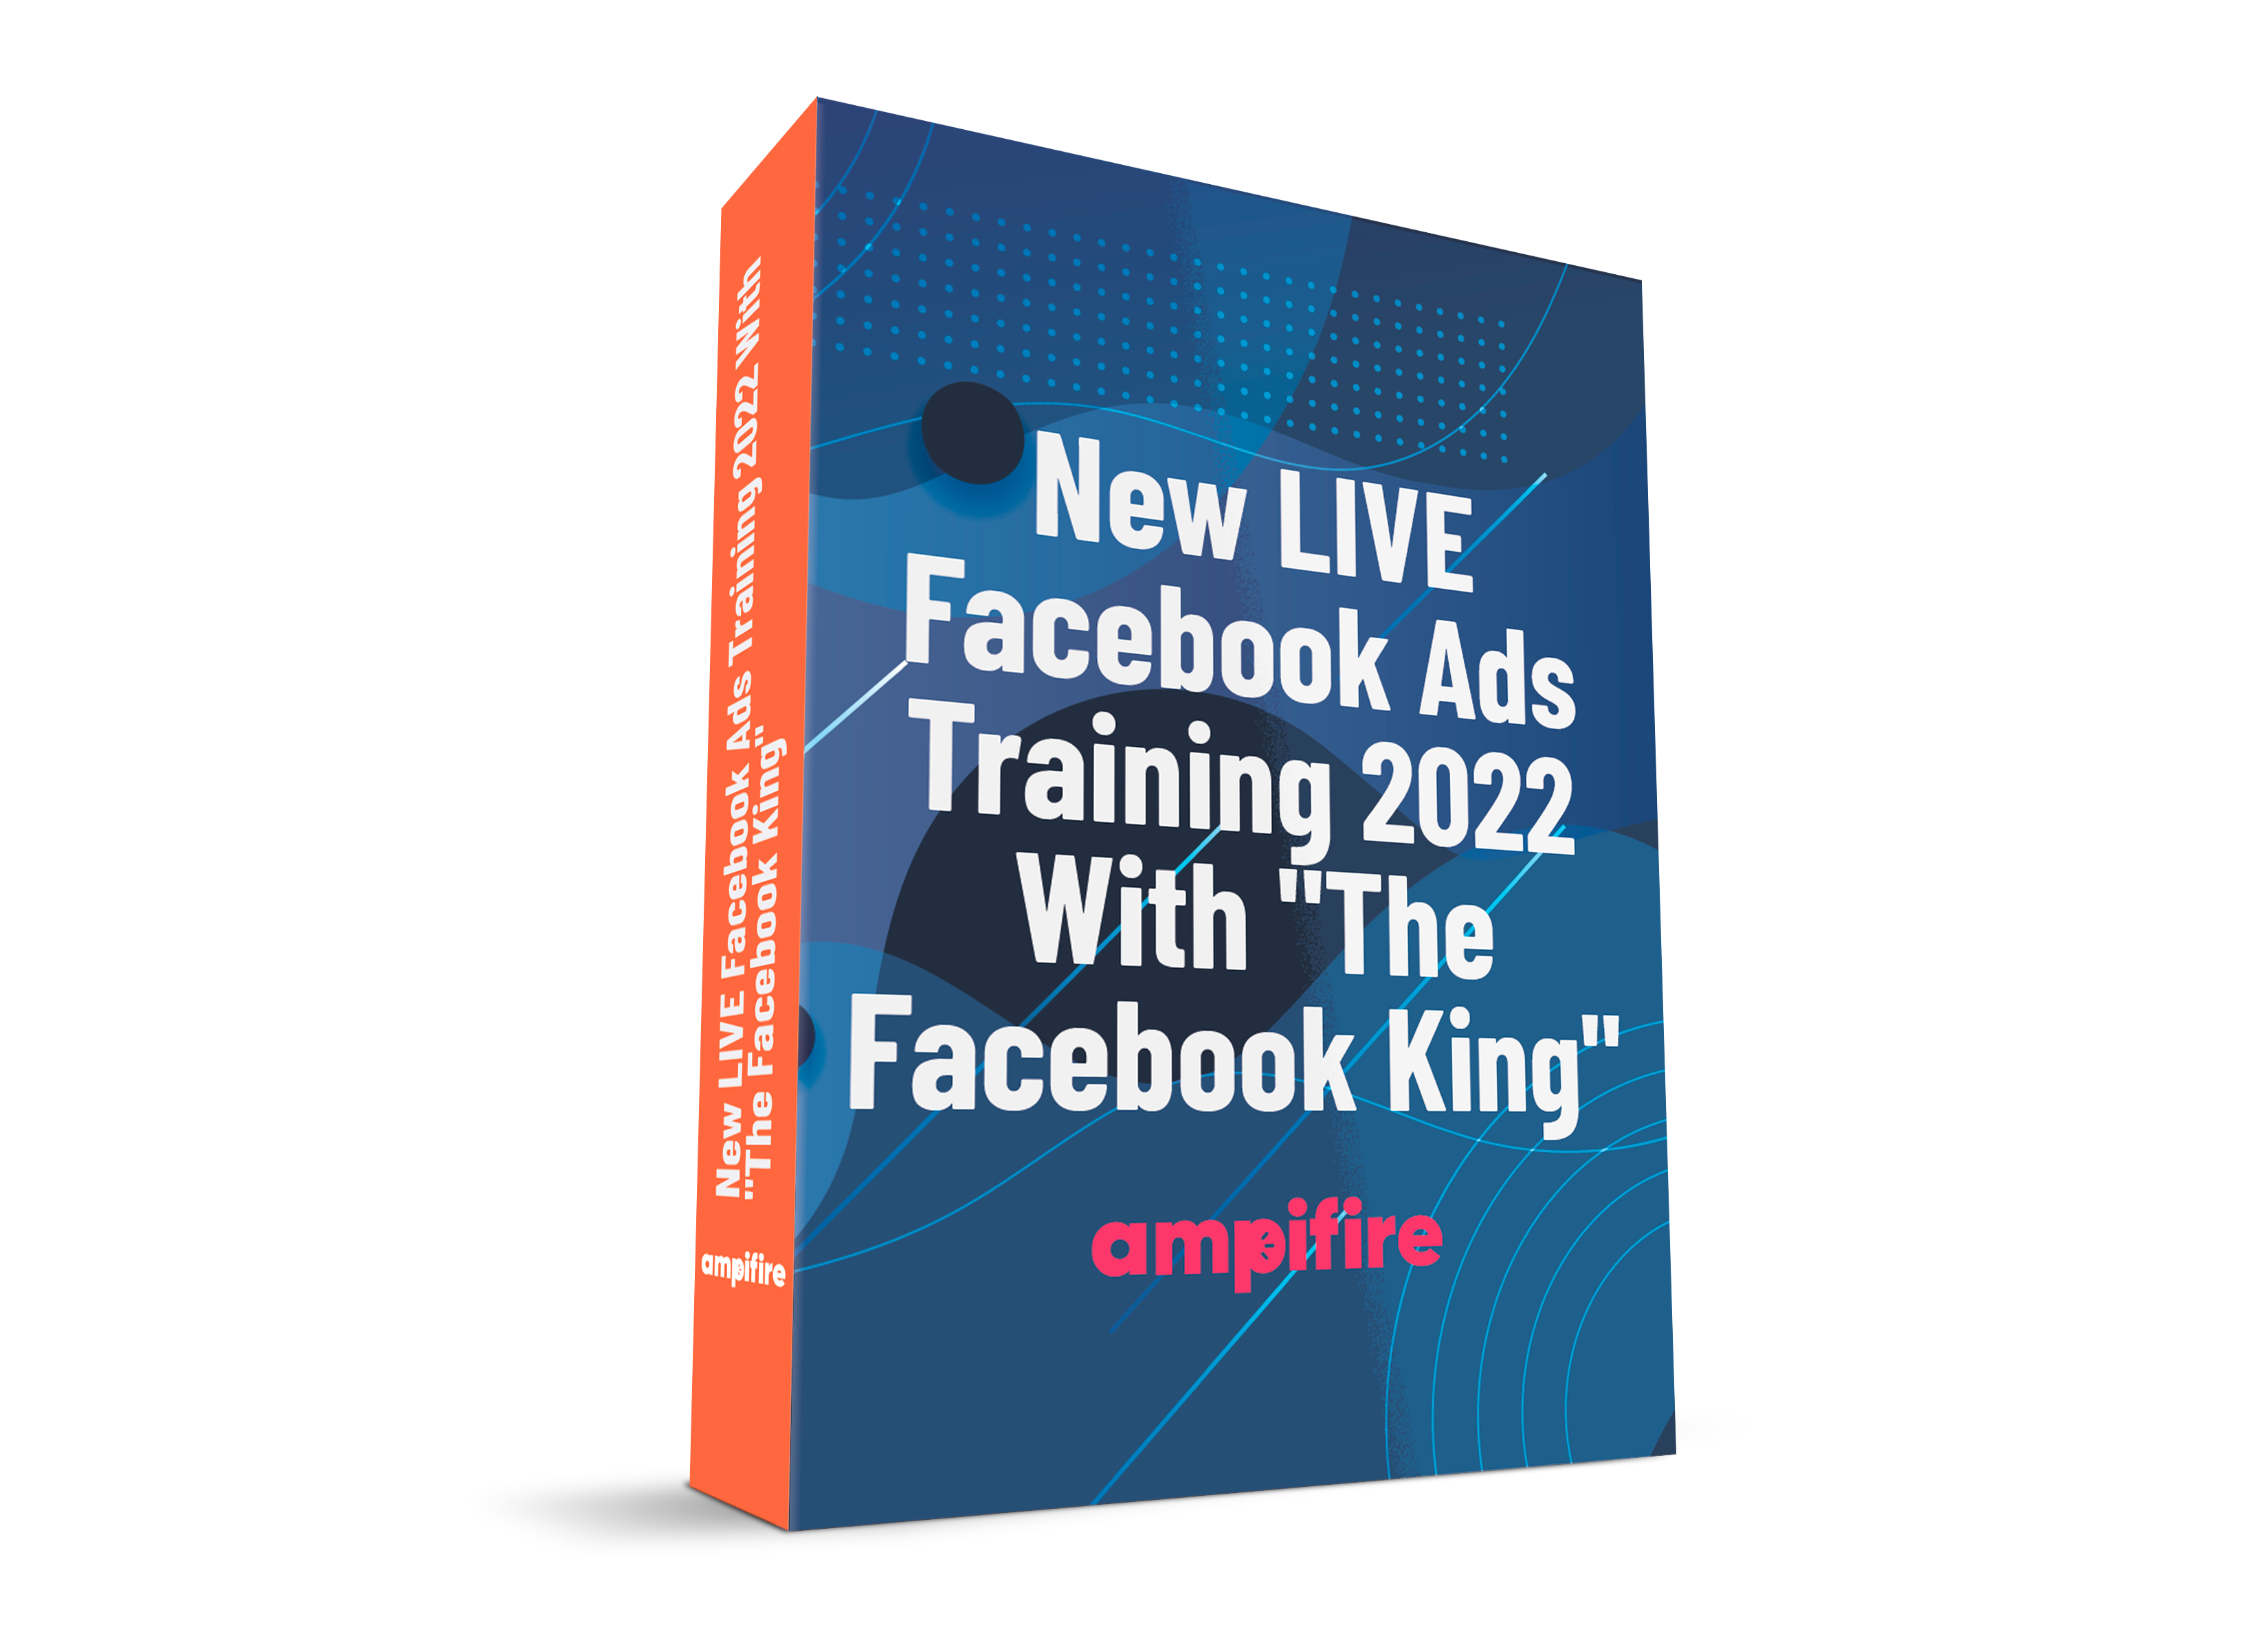 New LIVE Facebook Ads Training 2022 With The Facebook King